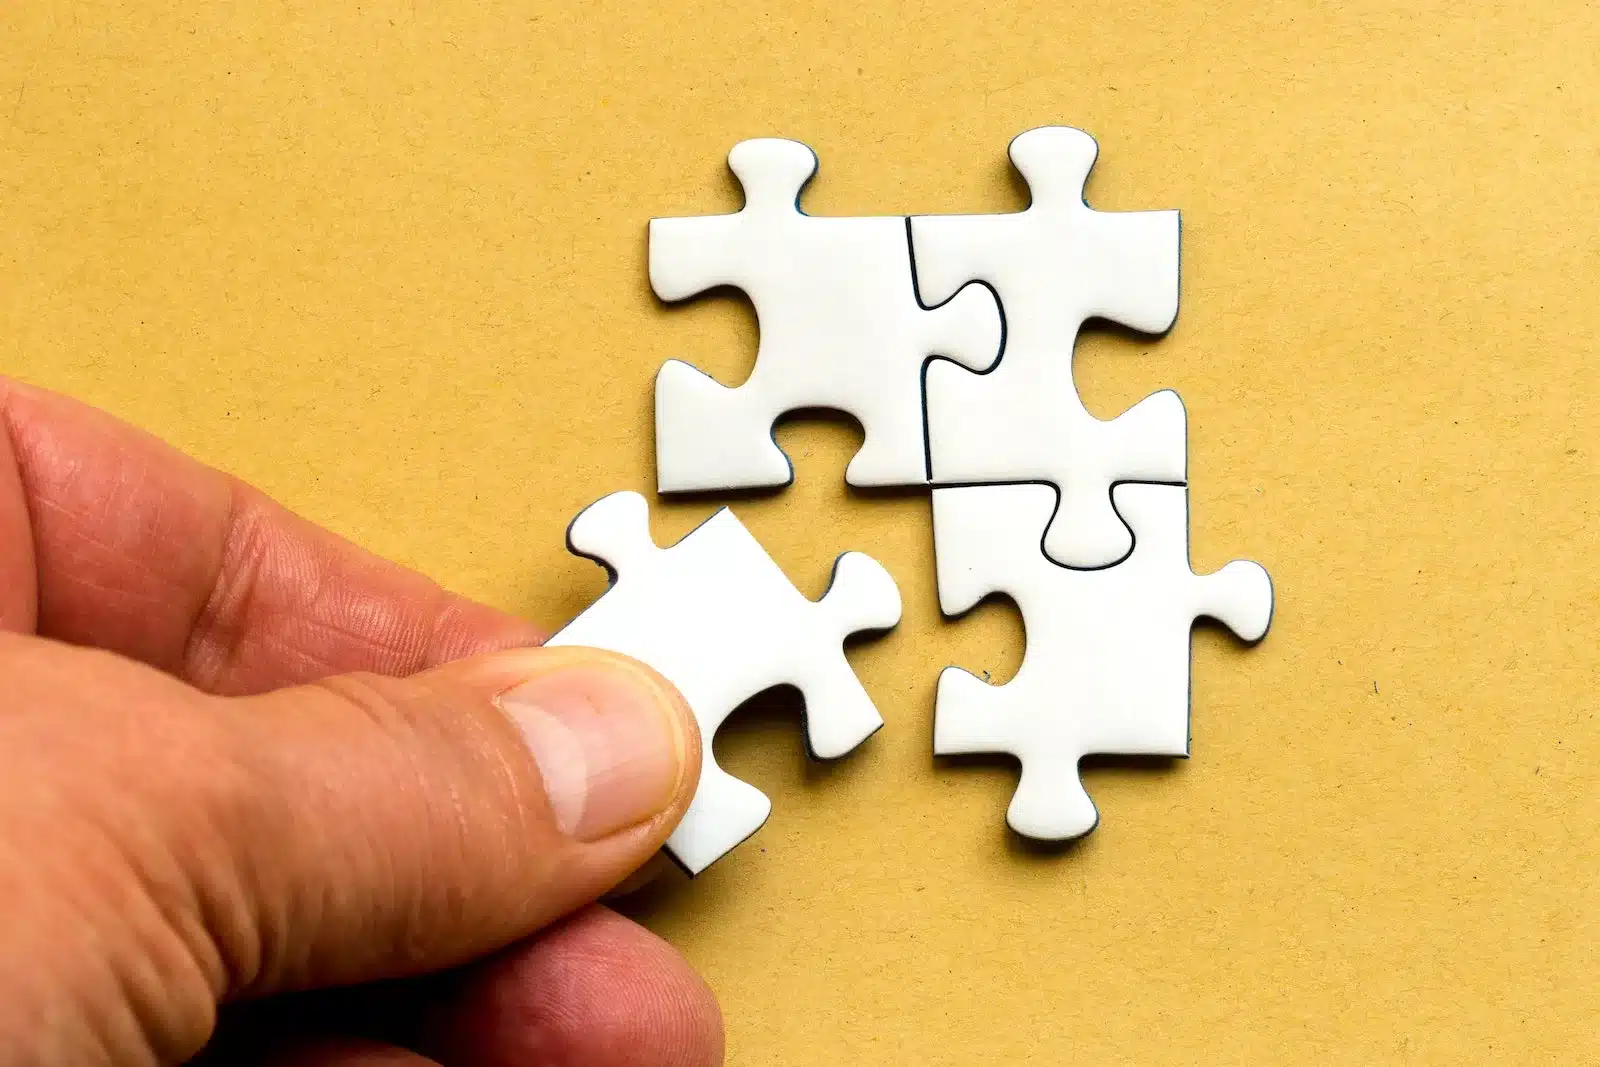 A hand adding a piece to a puzzle, symbolizing the concept of adding value to an organization.